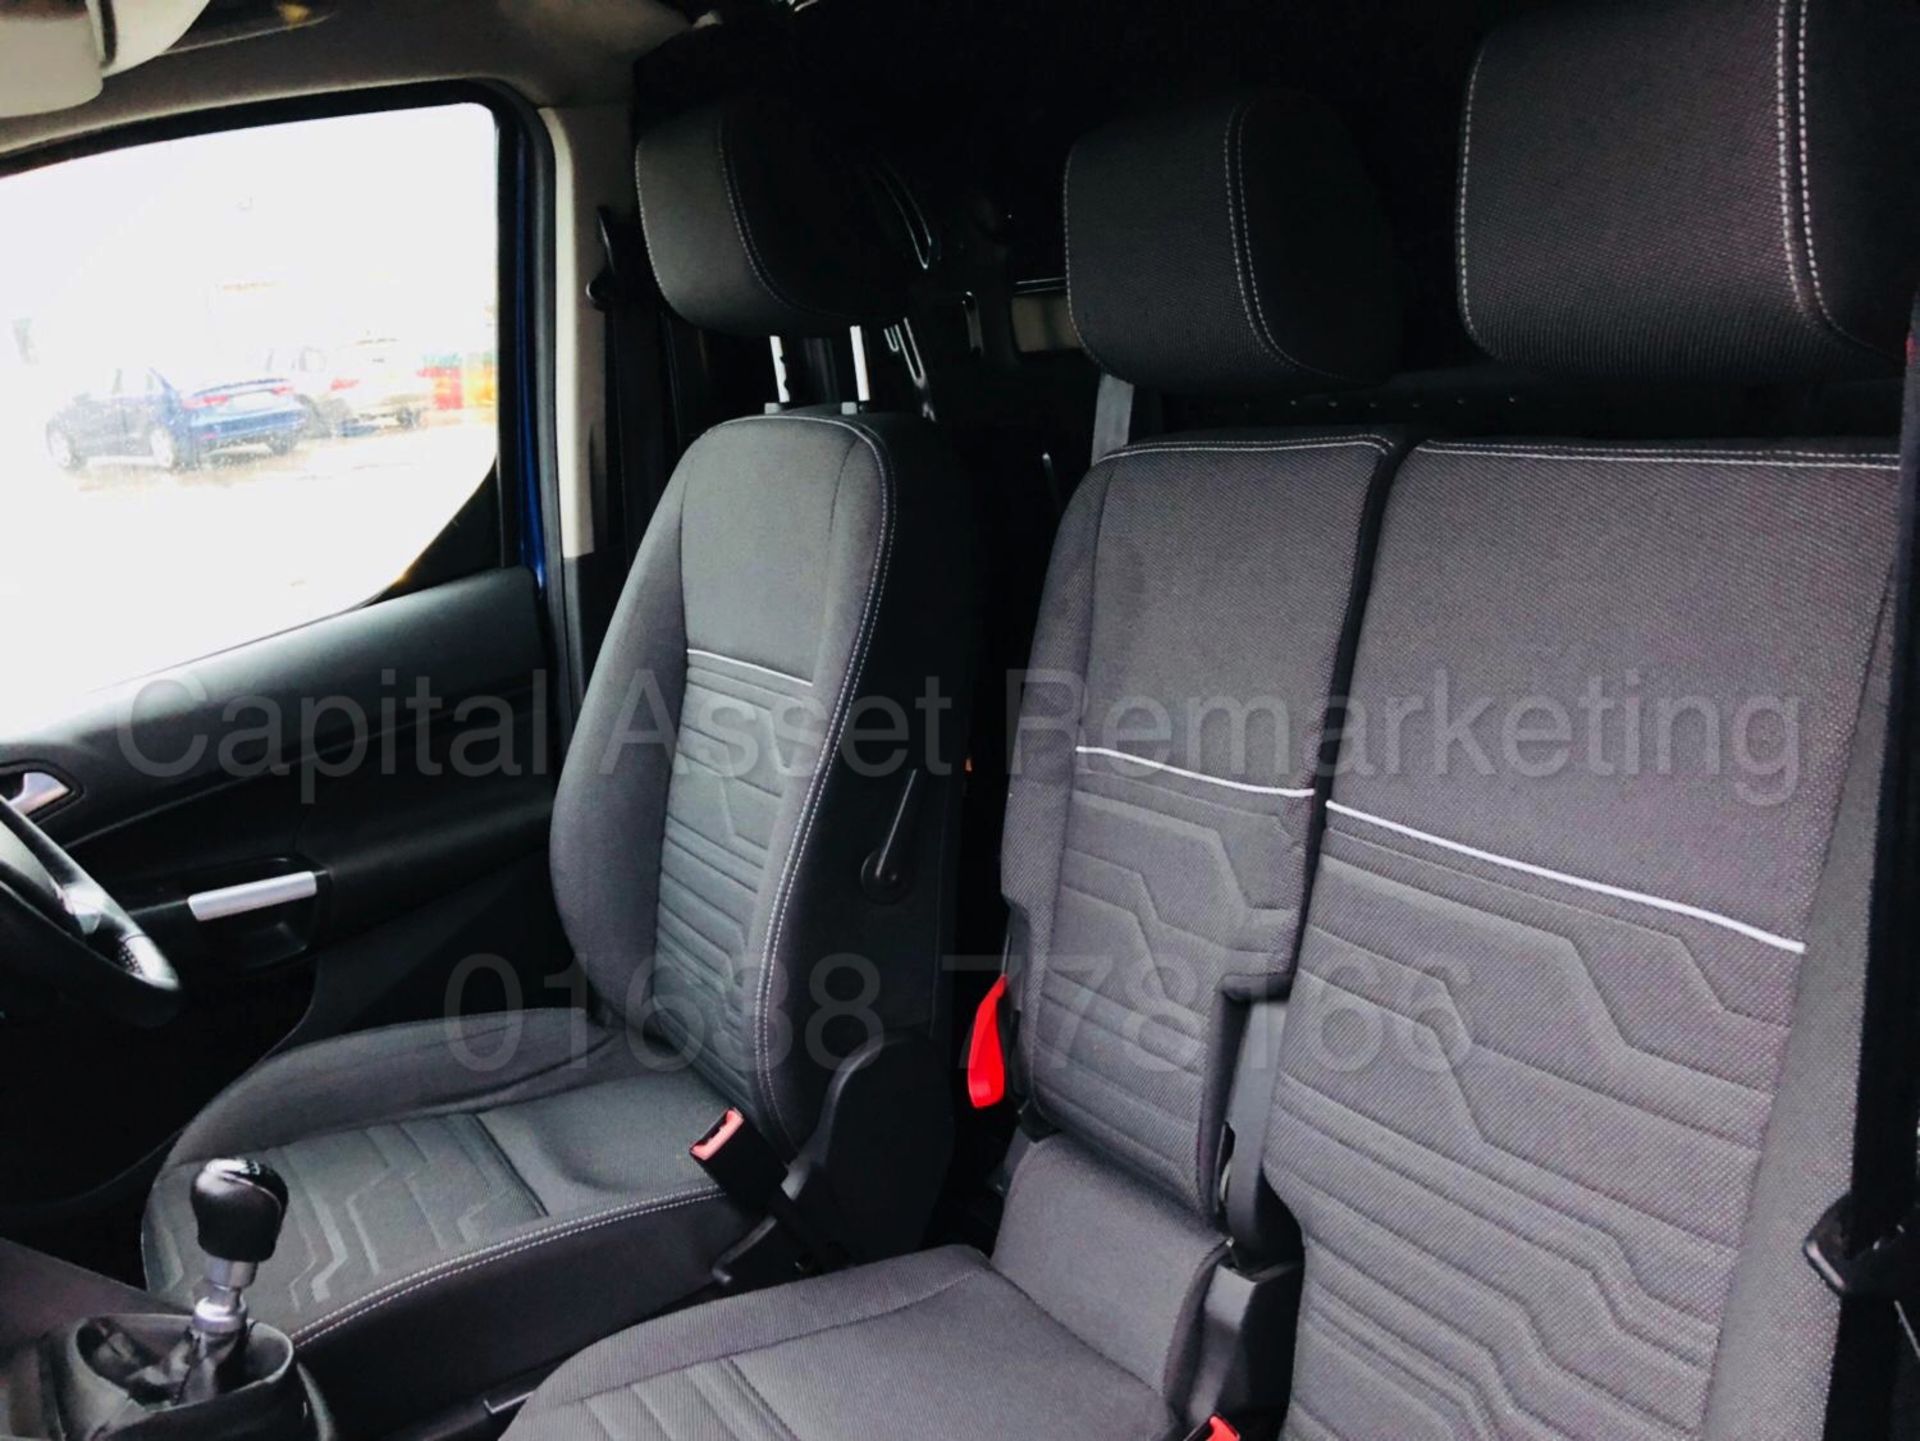 FORD TRANSIT CONNECT 'LIMITED' (2015 - FACELIFT MODEL) '1.6 TDCI - 115 PS - 6 SPEED' *A/C* (1 OWNER) - Image 14 of 28